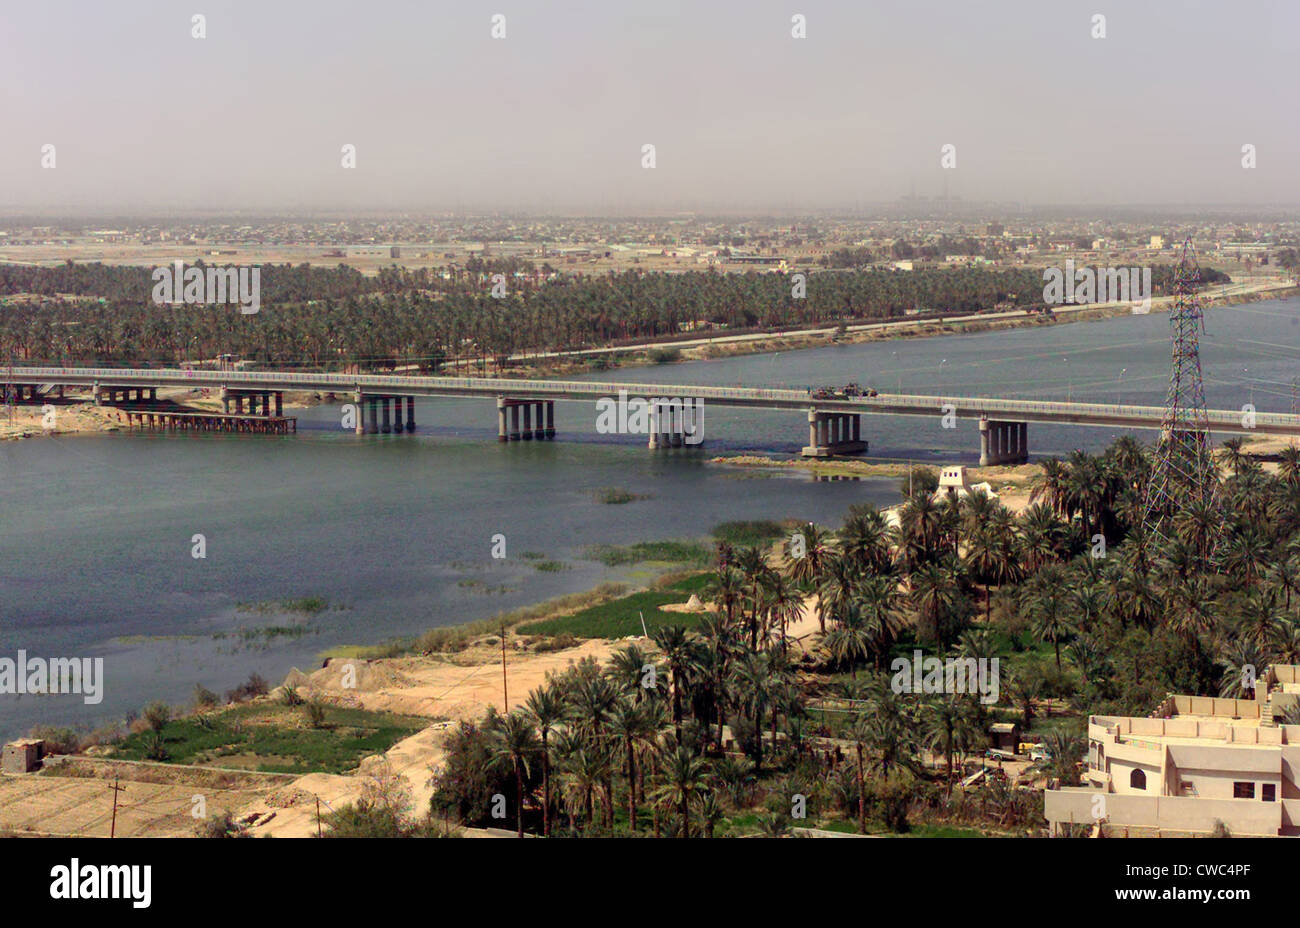 The main bridge in An Nasiriyah Iraq where intense fighting occurred between US Marines and Iraqi soldiers from March 23-April Stock Photo